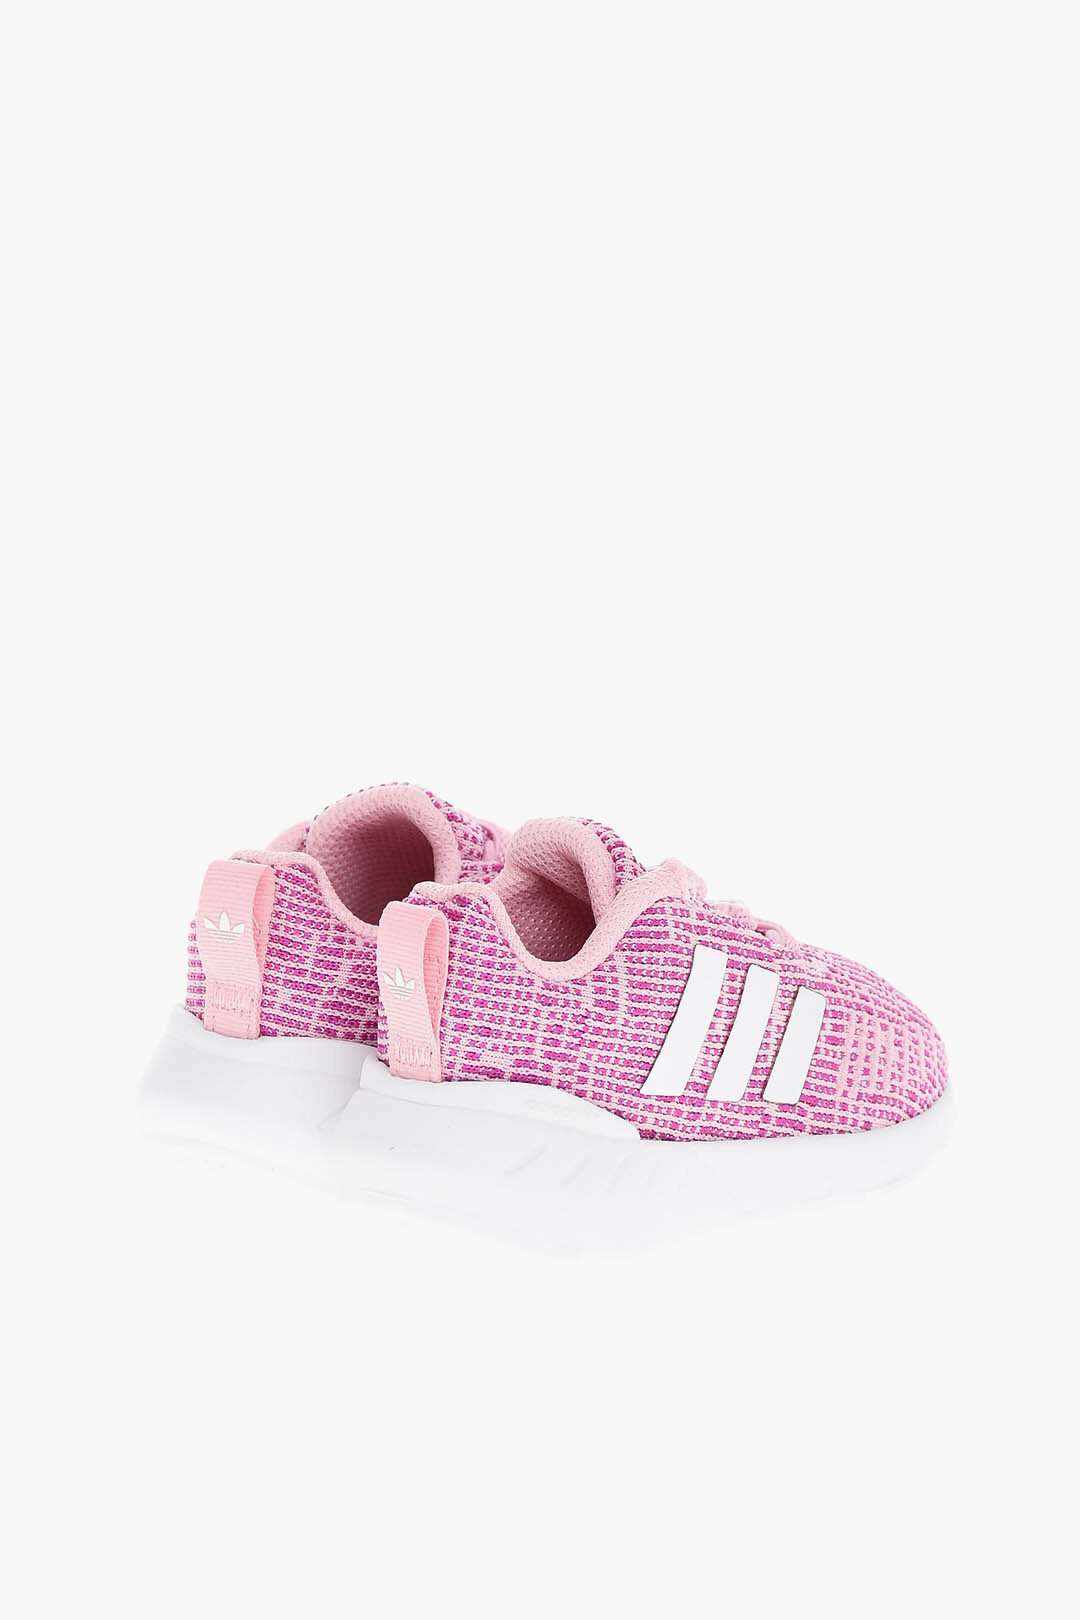 Museo Guggenheim Skalk Remolque Adidas Kids SWIFT RUN 22 Lace-up Sneakers with Side Stripes girls - Glamood  Outlet